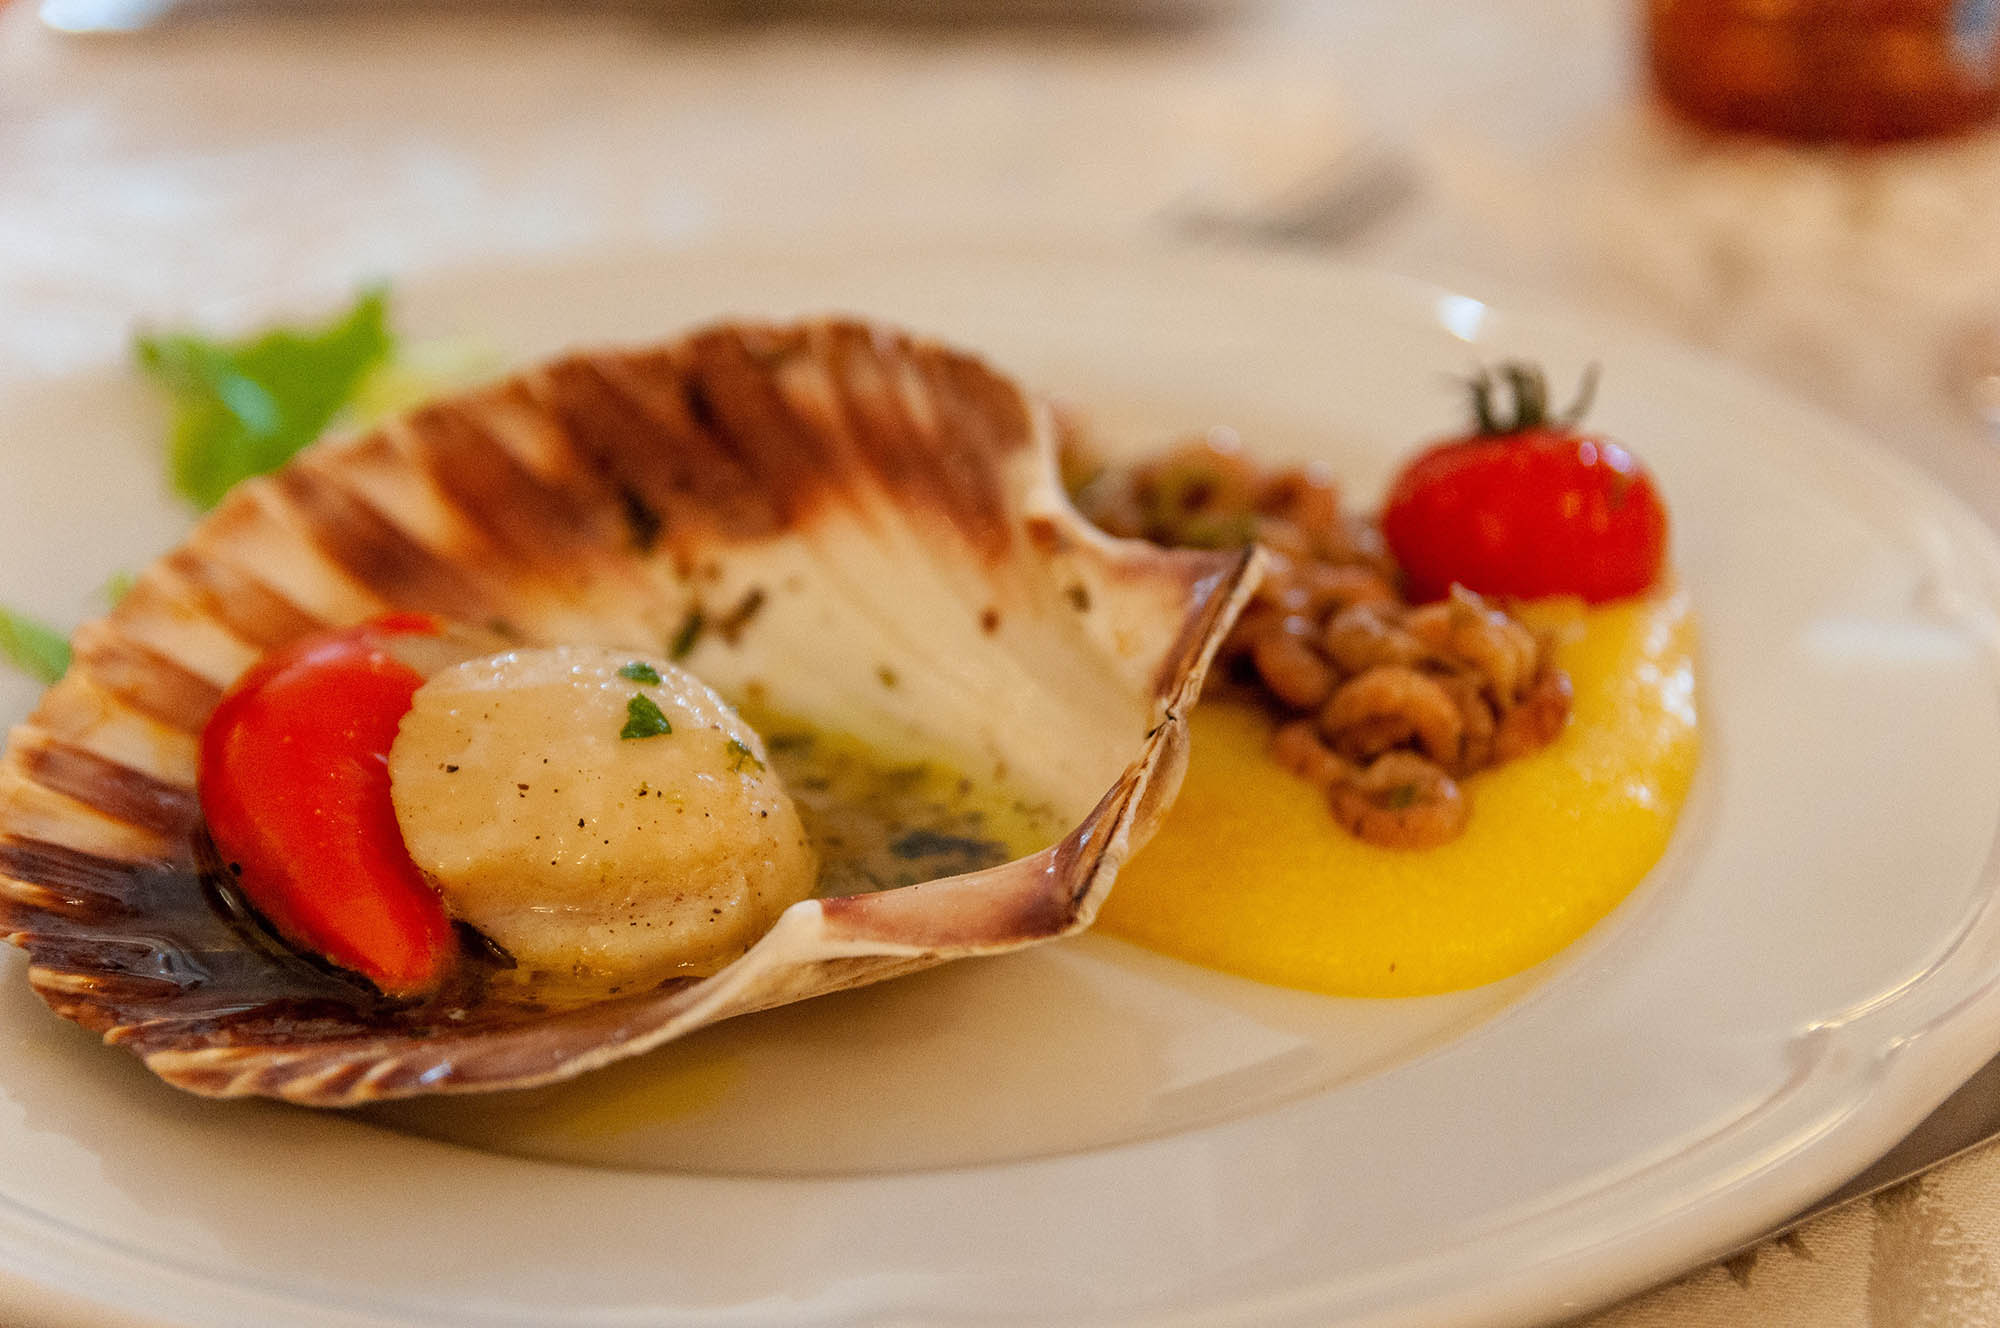 Scrumptious Delights: The Baked Scallops Recipe That'll Make You Swoon